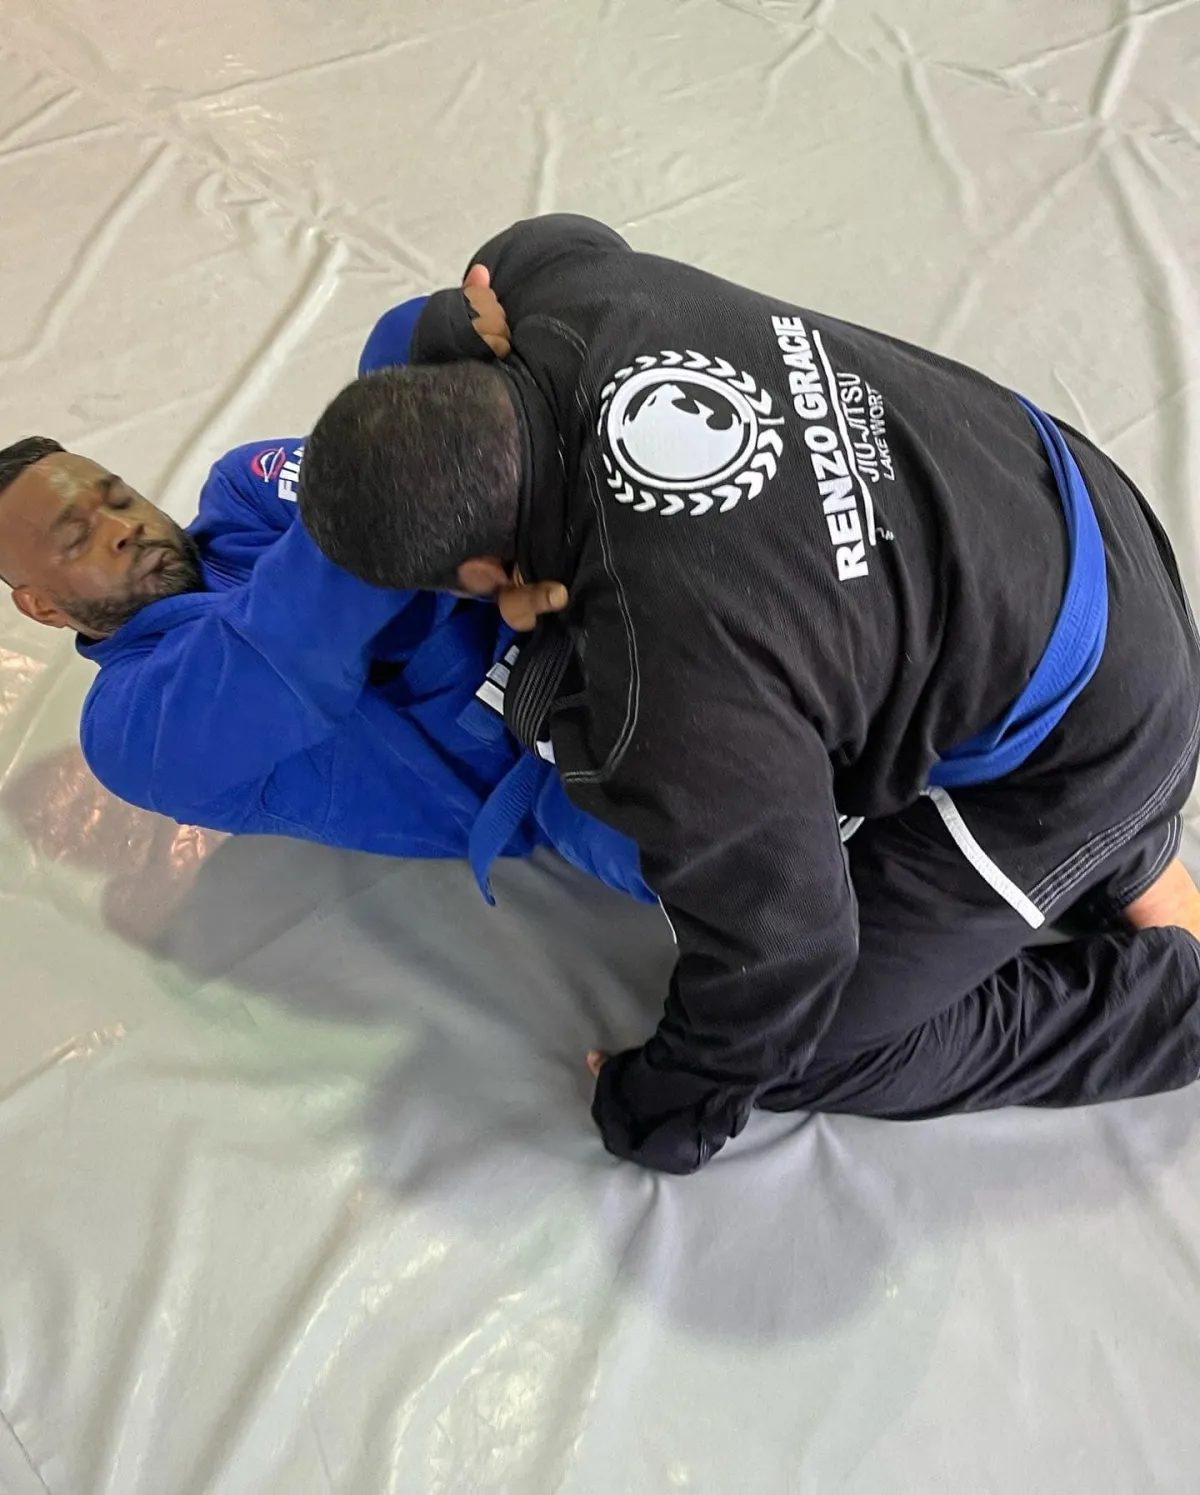 Shows two jiu-jitsu practitioners, both wearing blue belts, engaged in a practice session on the ground. They are wearing traditional jiu-jitsu uniforms (gi) and are fully focused on their movements and techniques. The two practitioners are using a combination of grappling and groundwork techniques, as they practice and refine their jiu-jitsu skills. The gym has a spacious and well-lit training area, with mats covering the floor and motivational posters and banners on the walls. The atmosphere is one of discipline and concentration, as the practitioners work to improve their jiu-jitsu proficiency.